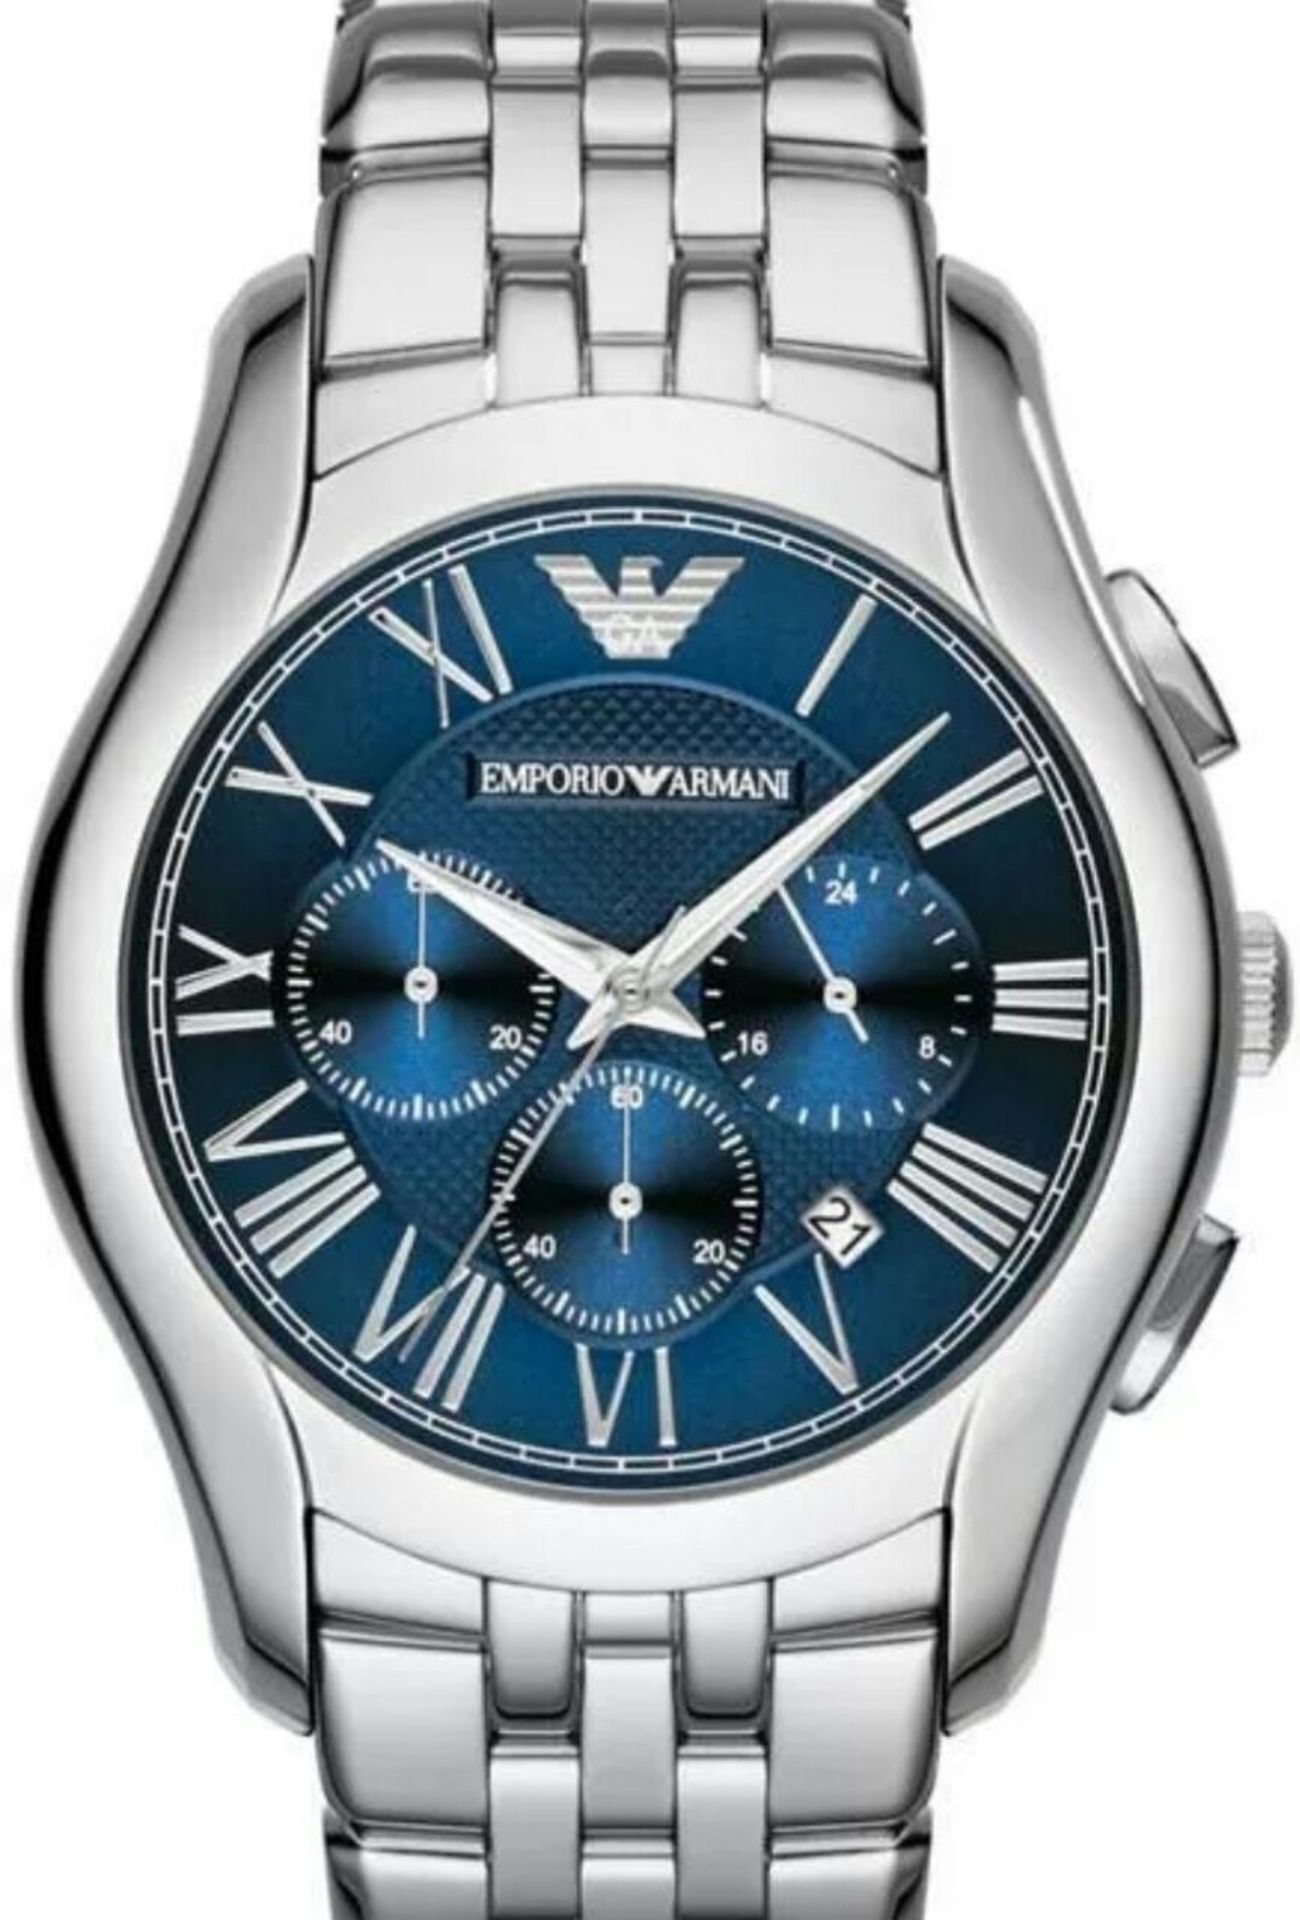 BRAND NEW GENTS EMPORIO ARMANI AR1787, SILVER BRACELET WATCH WITH ARMANI WATCH BOXES, MANUAL